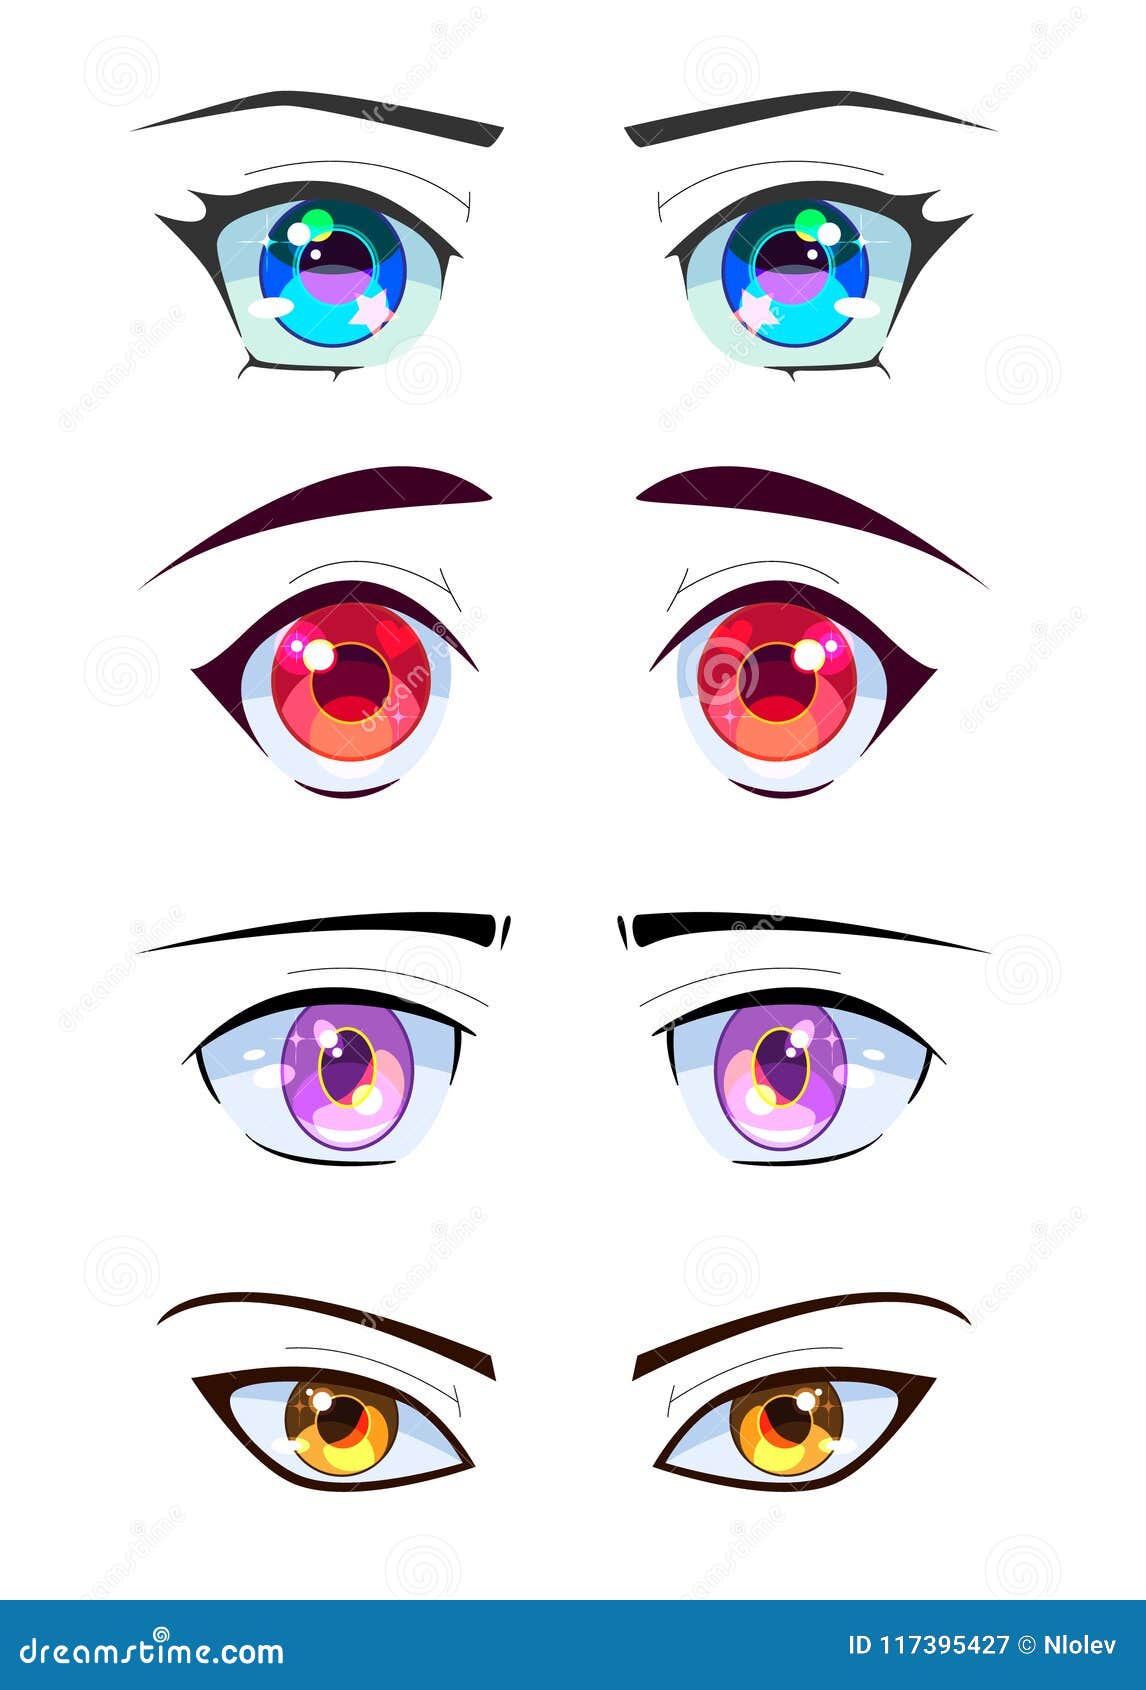 Anime Red Eyes PNG Transparent Background And Clipart Image For Free  Download - Lovepik | 401229600